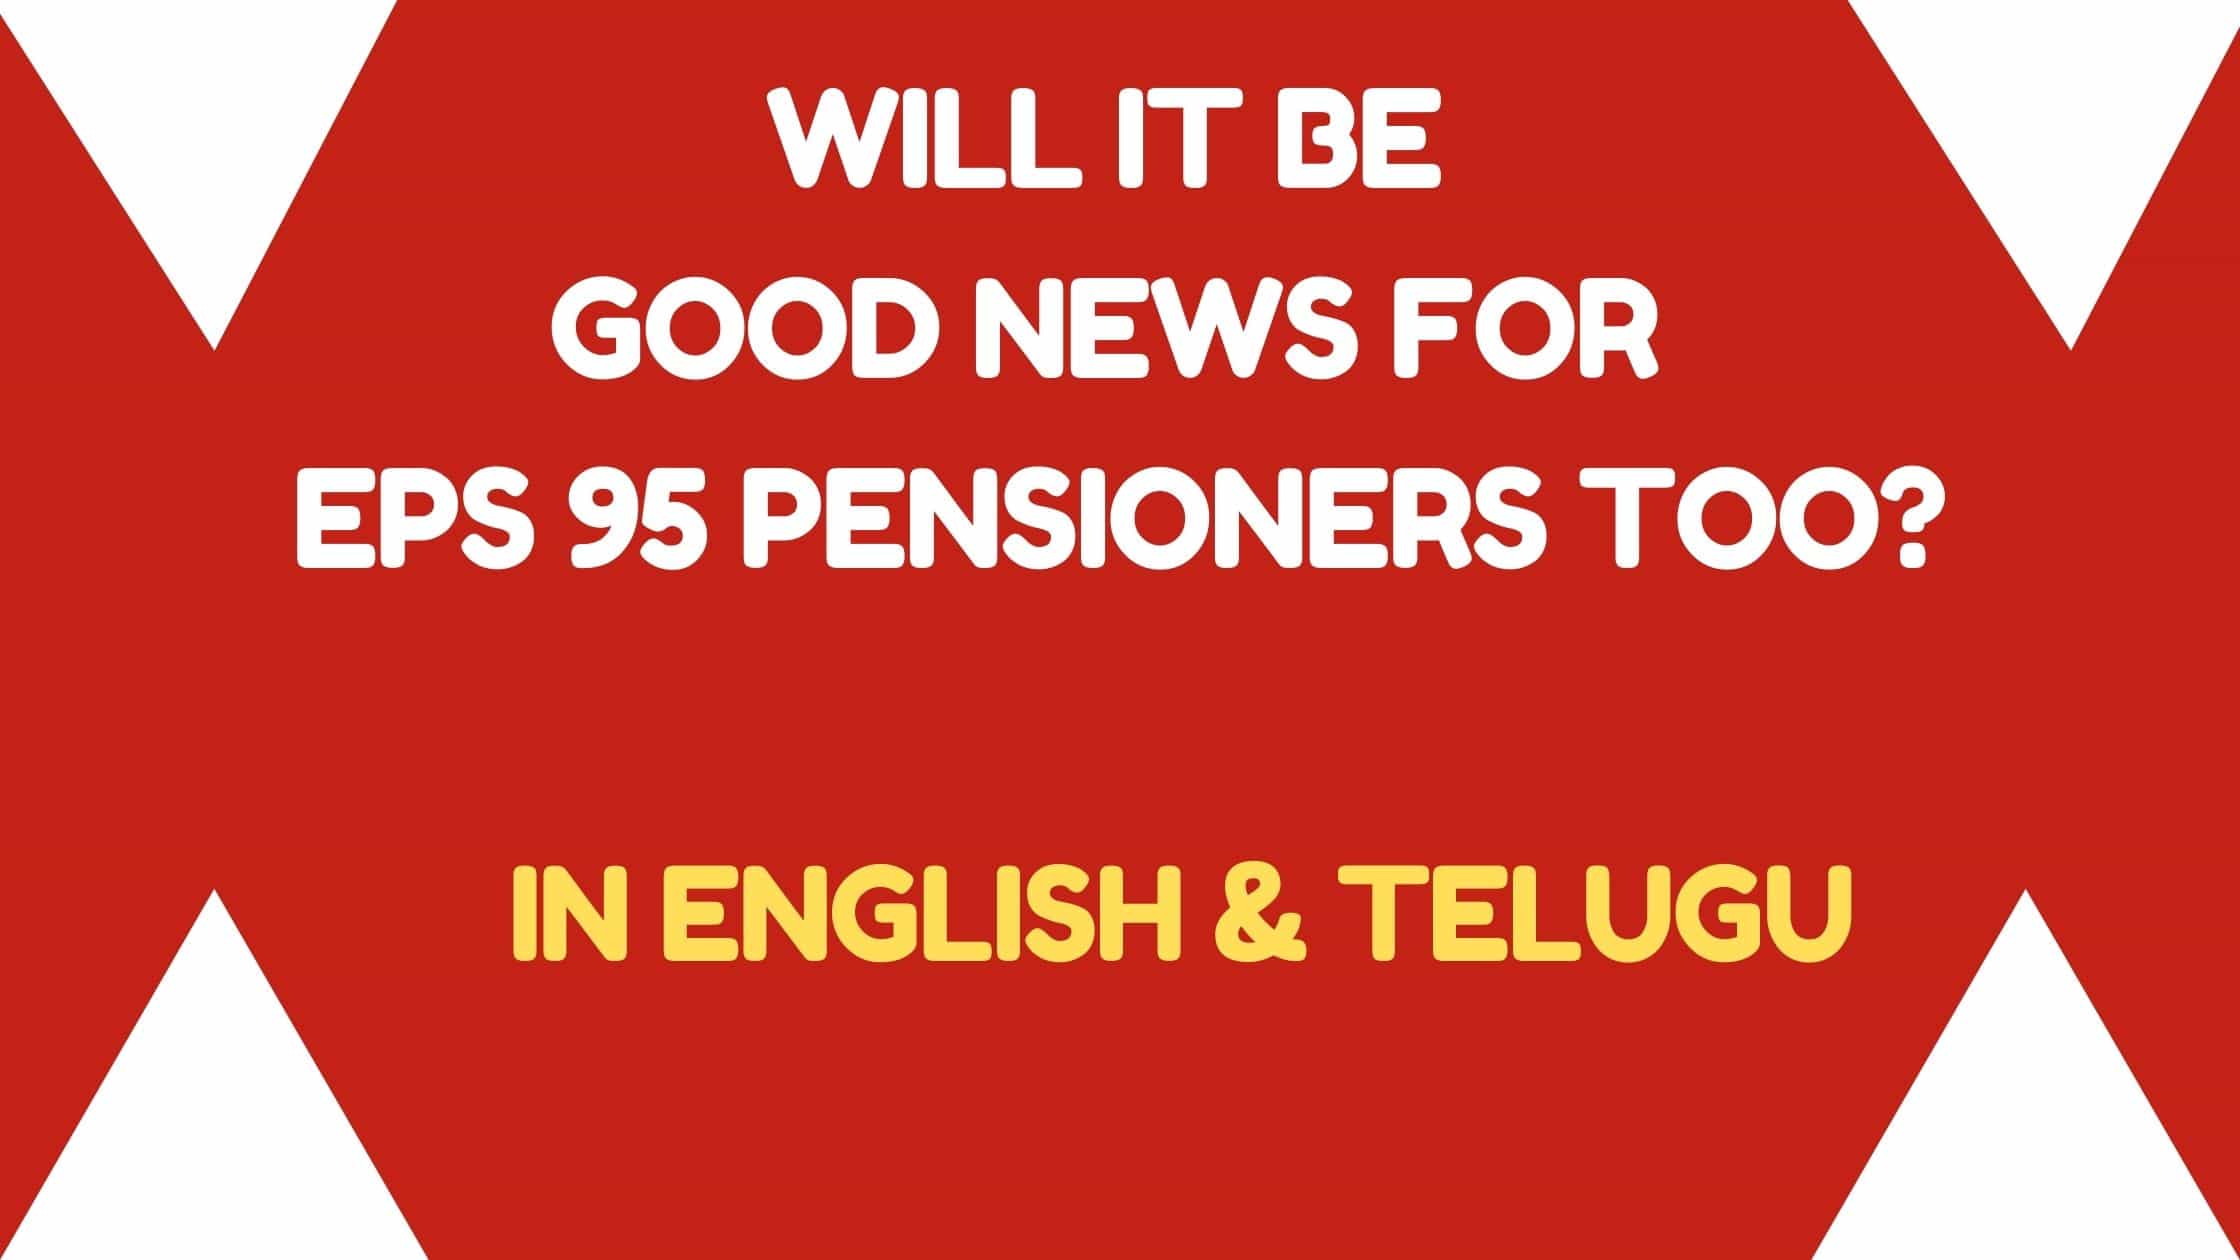 Will it be Good News for Eps 95 Pensioners too?